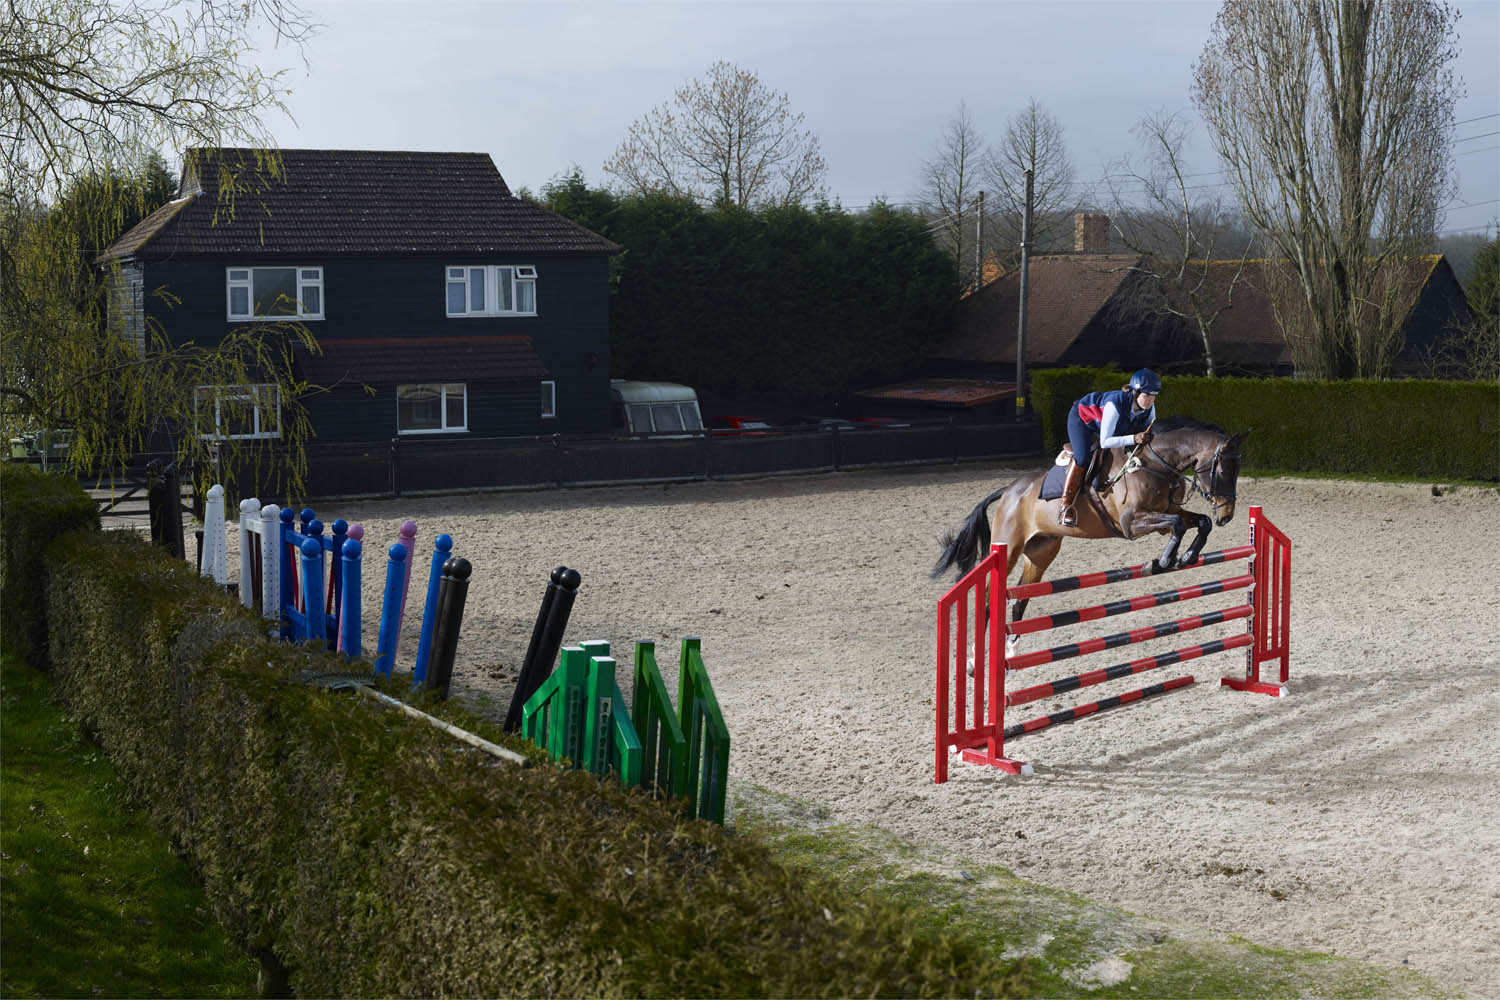 Pippa Funnell, three-day event rider, practices in the ring adjacent to her house.